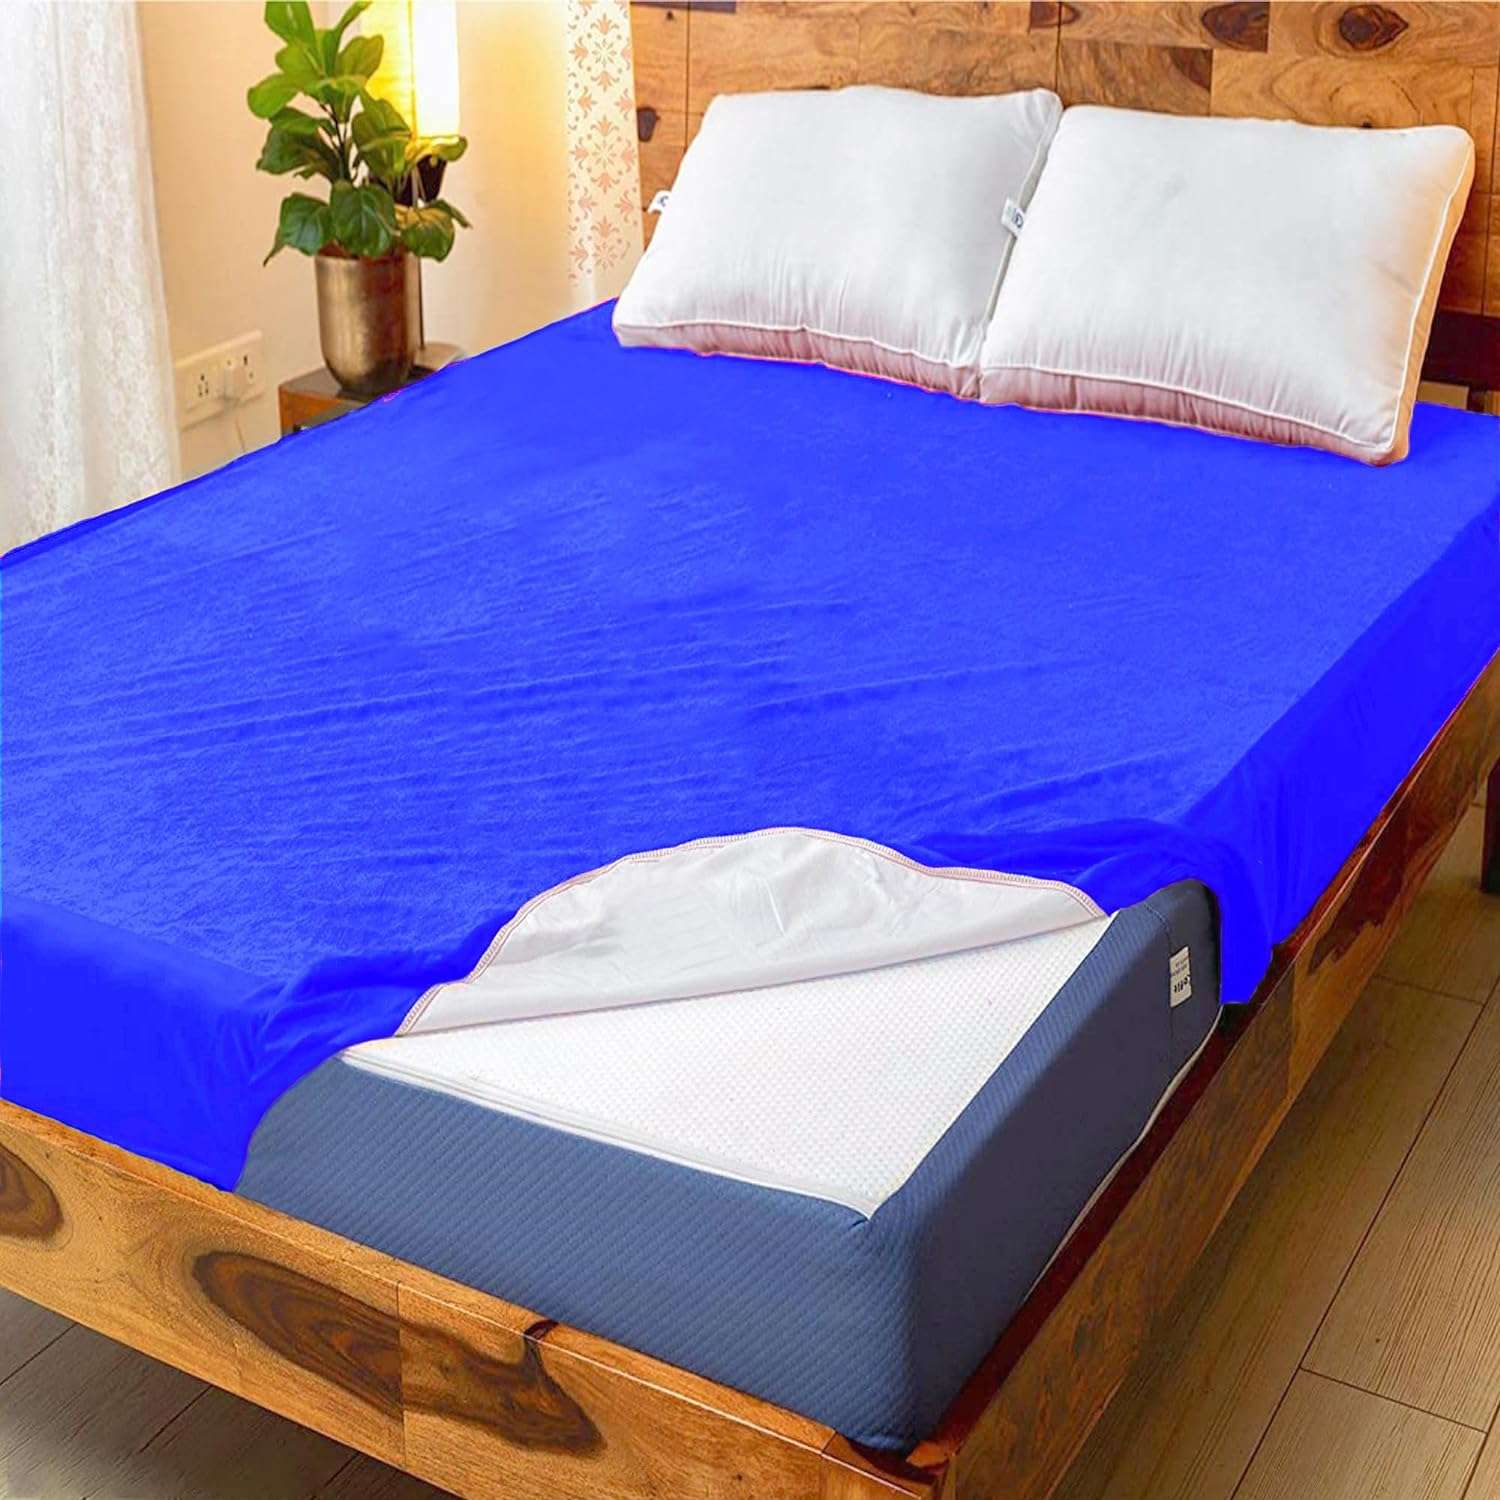 GADDA CO Waterproof Mattress Protector Cover | Terry Cotton Bed Protector, Single Bed - 72 X 36, 6 X 3 Feet - Royal Blue